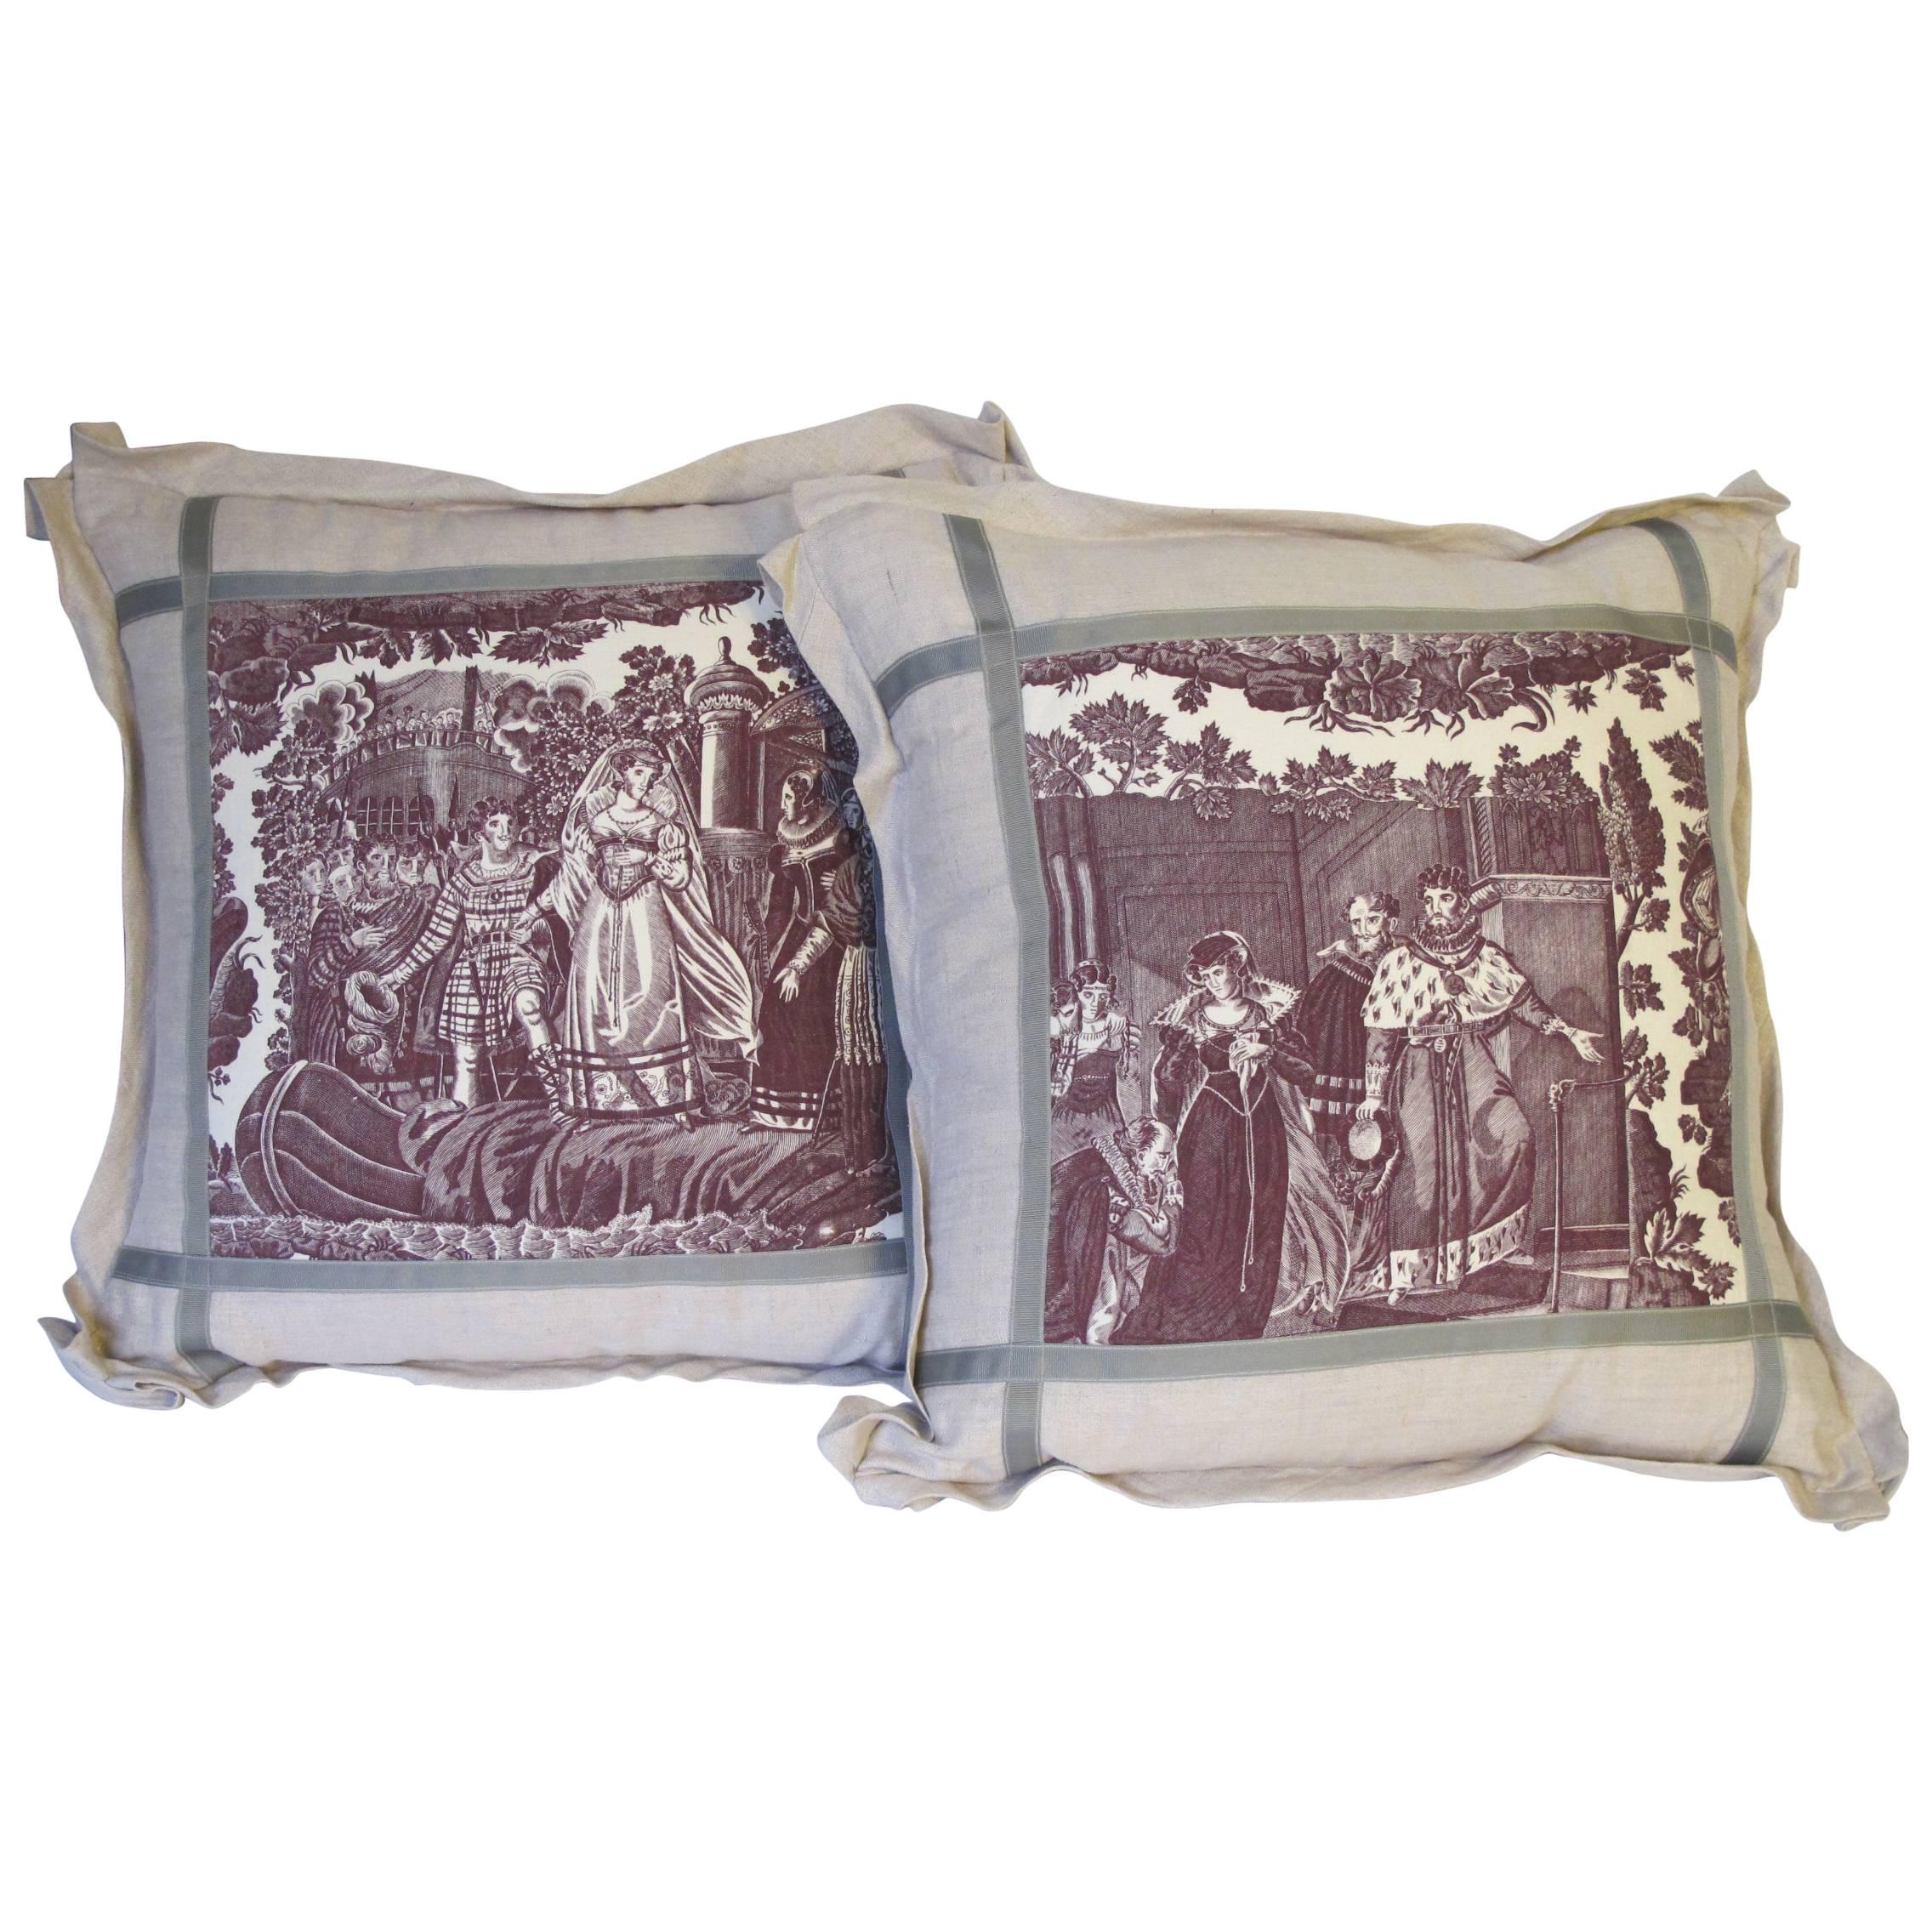 Pair of 19th Century Toile Pillows by Mary Jane McCarty